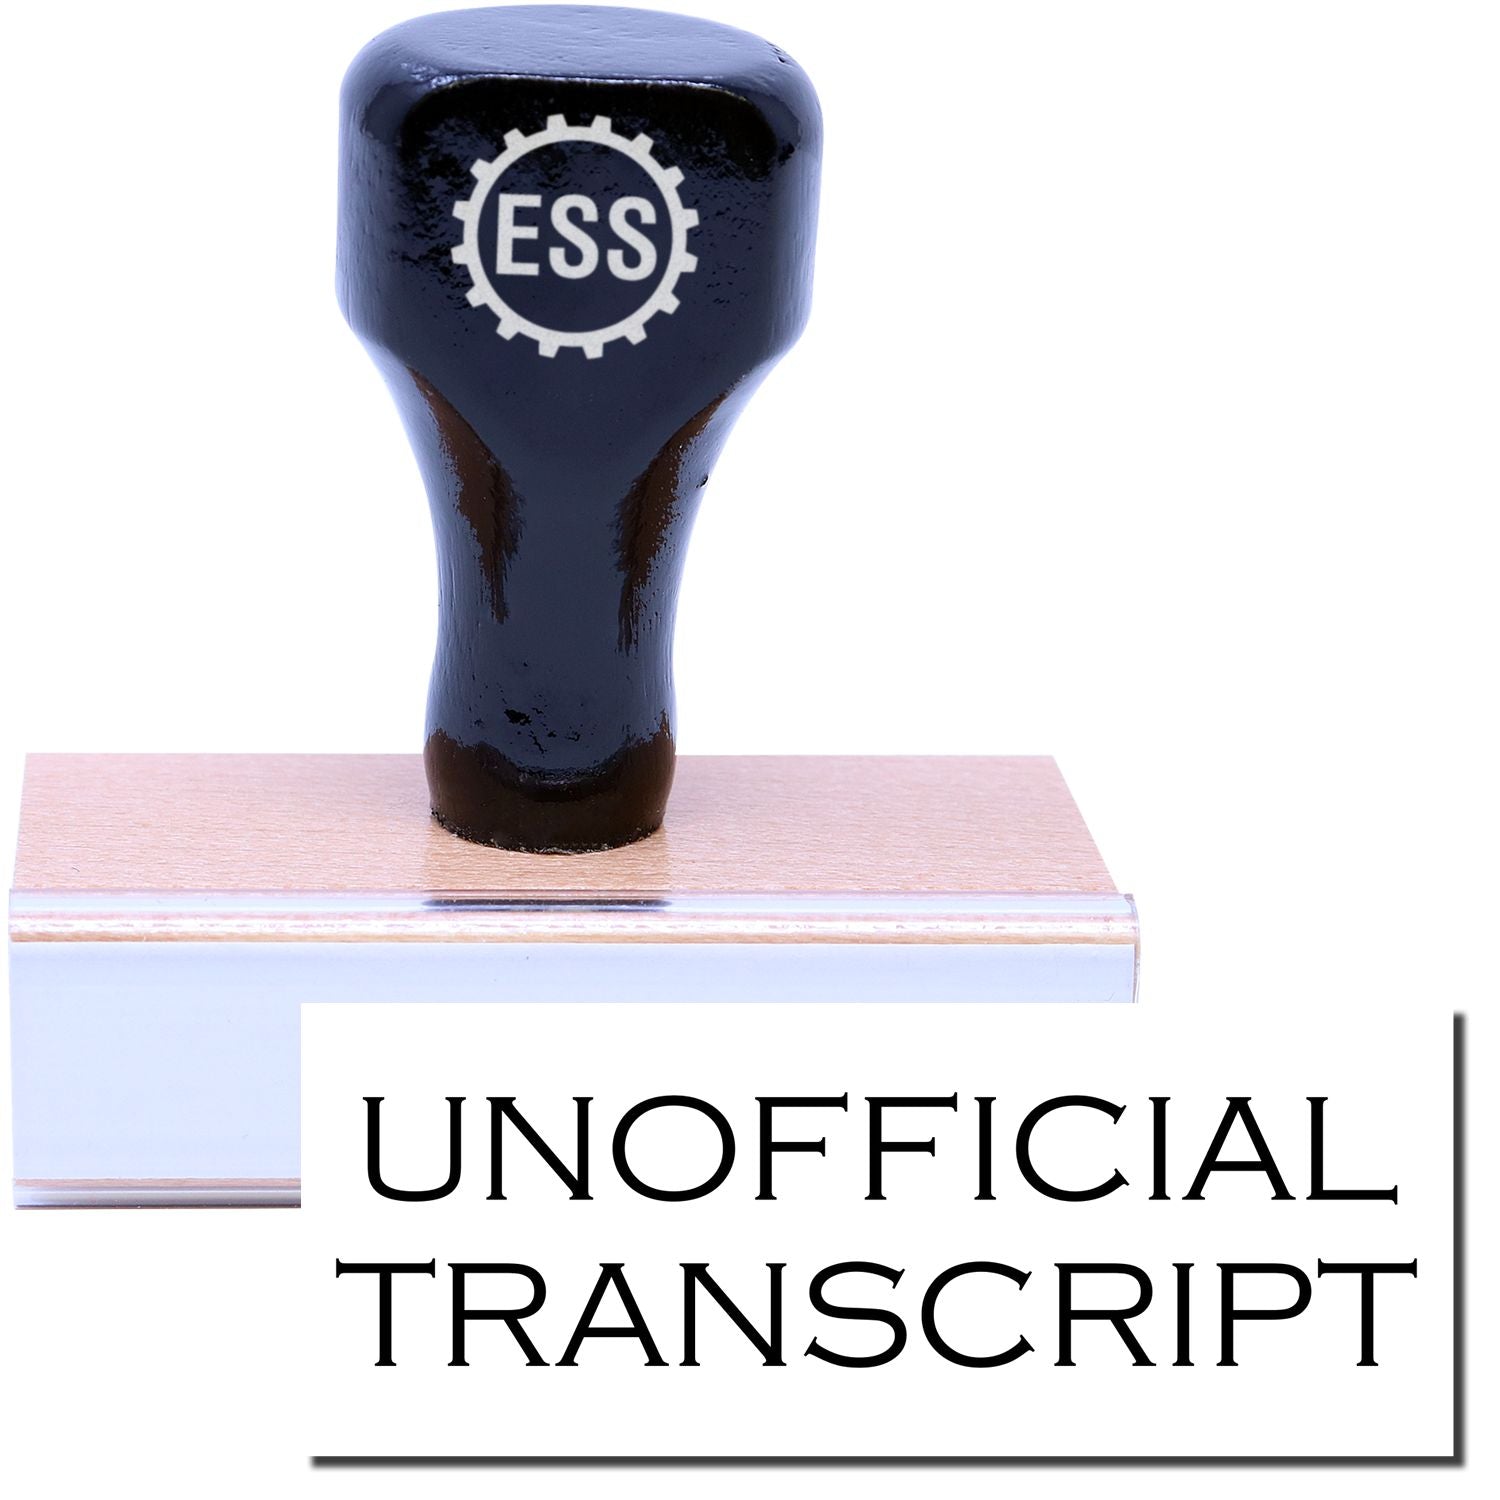 A stock office rubber stamp with a stamped image showing how the text "UNOFFICIAL TRANSCRIPT" is displayed after stamping.